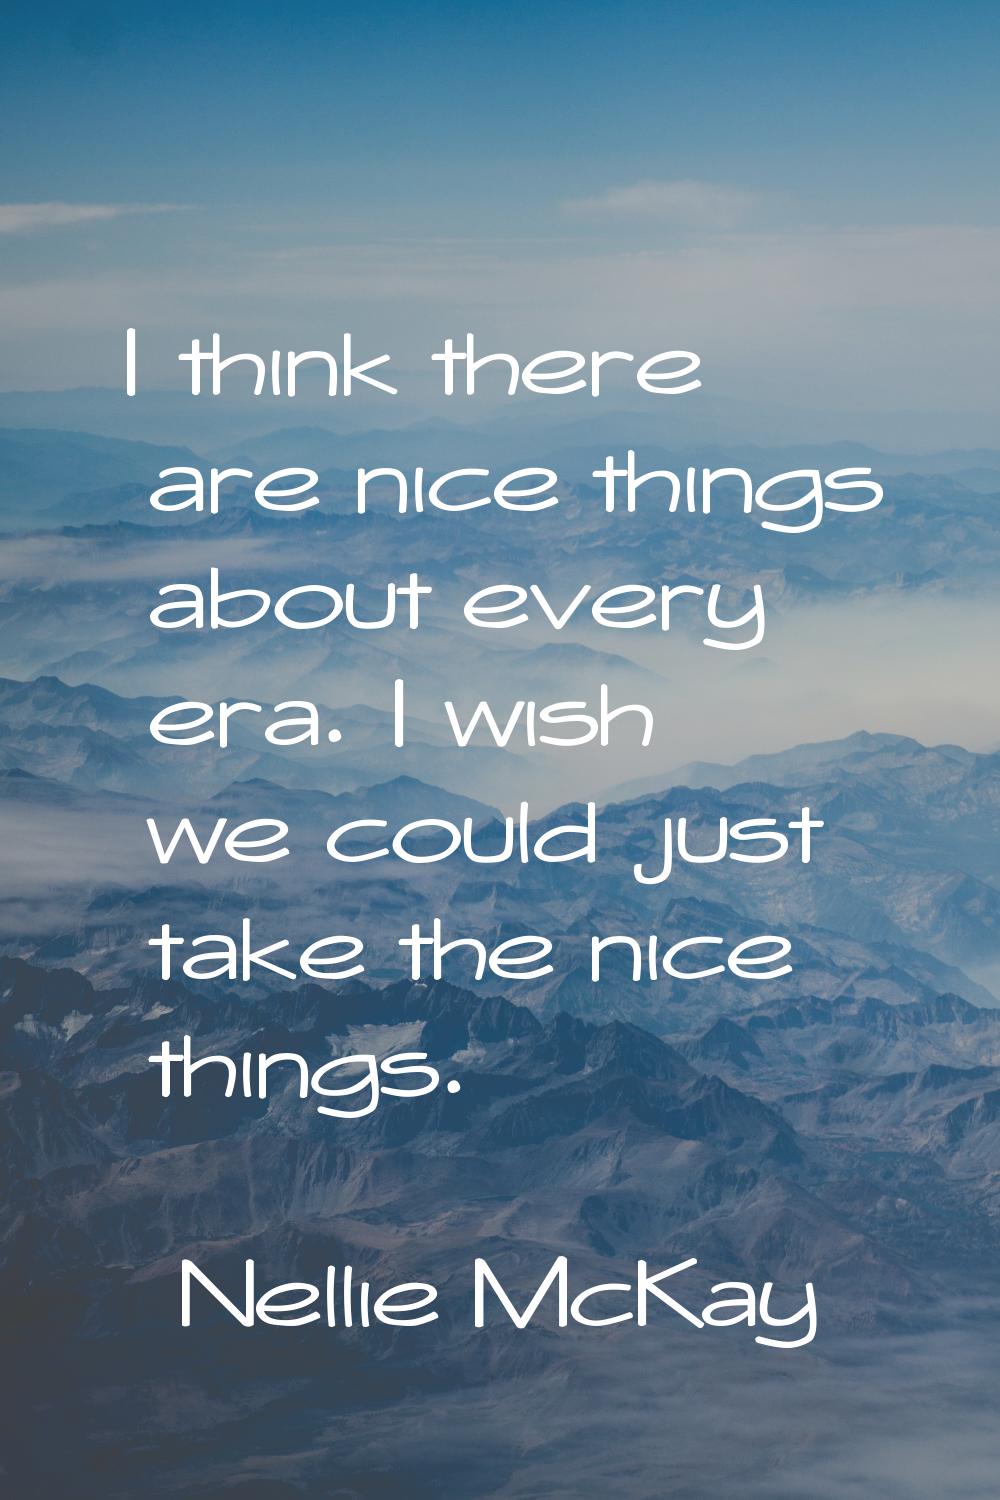 I think there are nice things about every era. I wish we could just take the nice things.